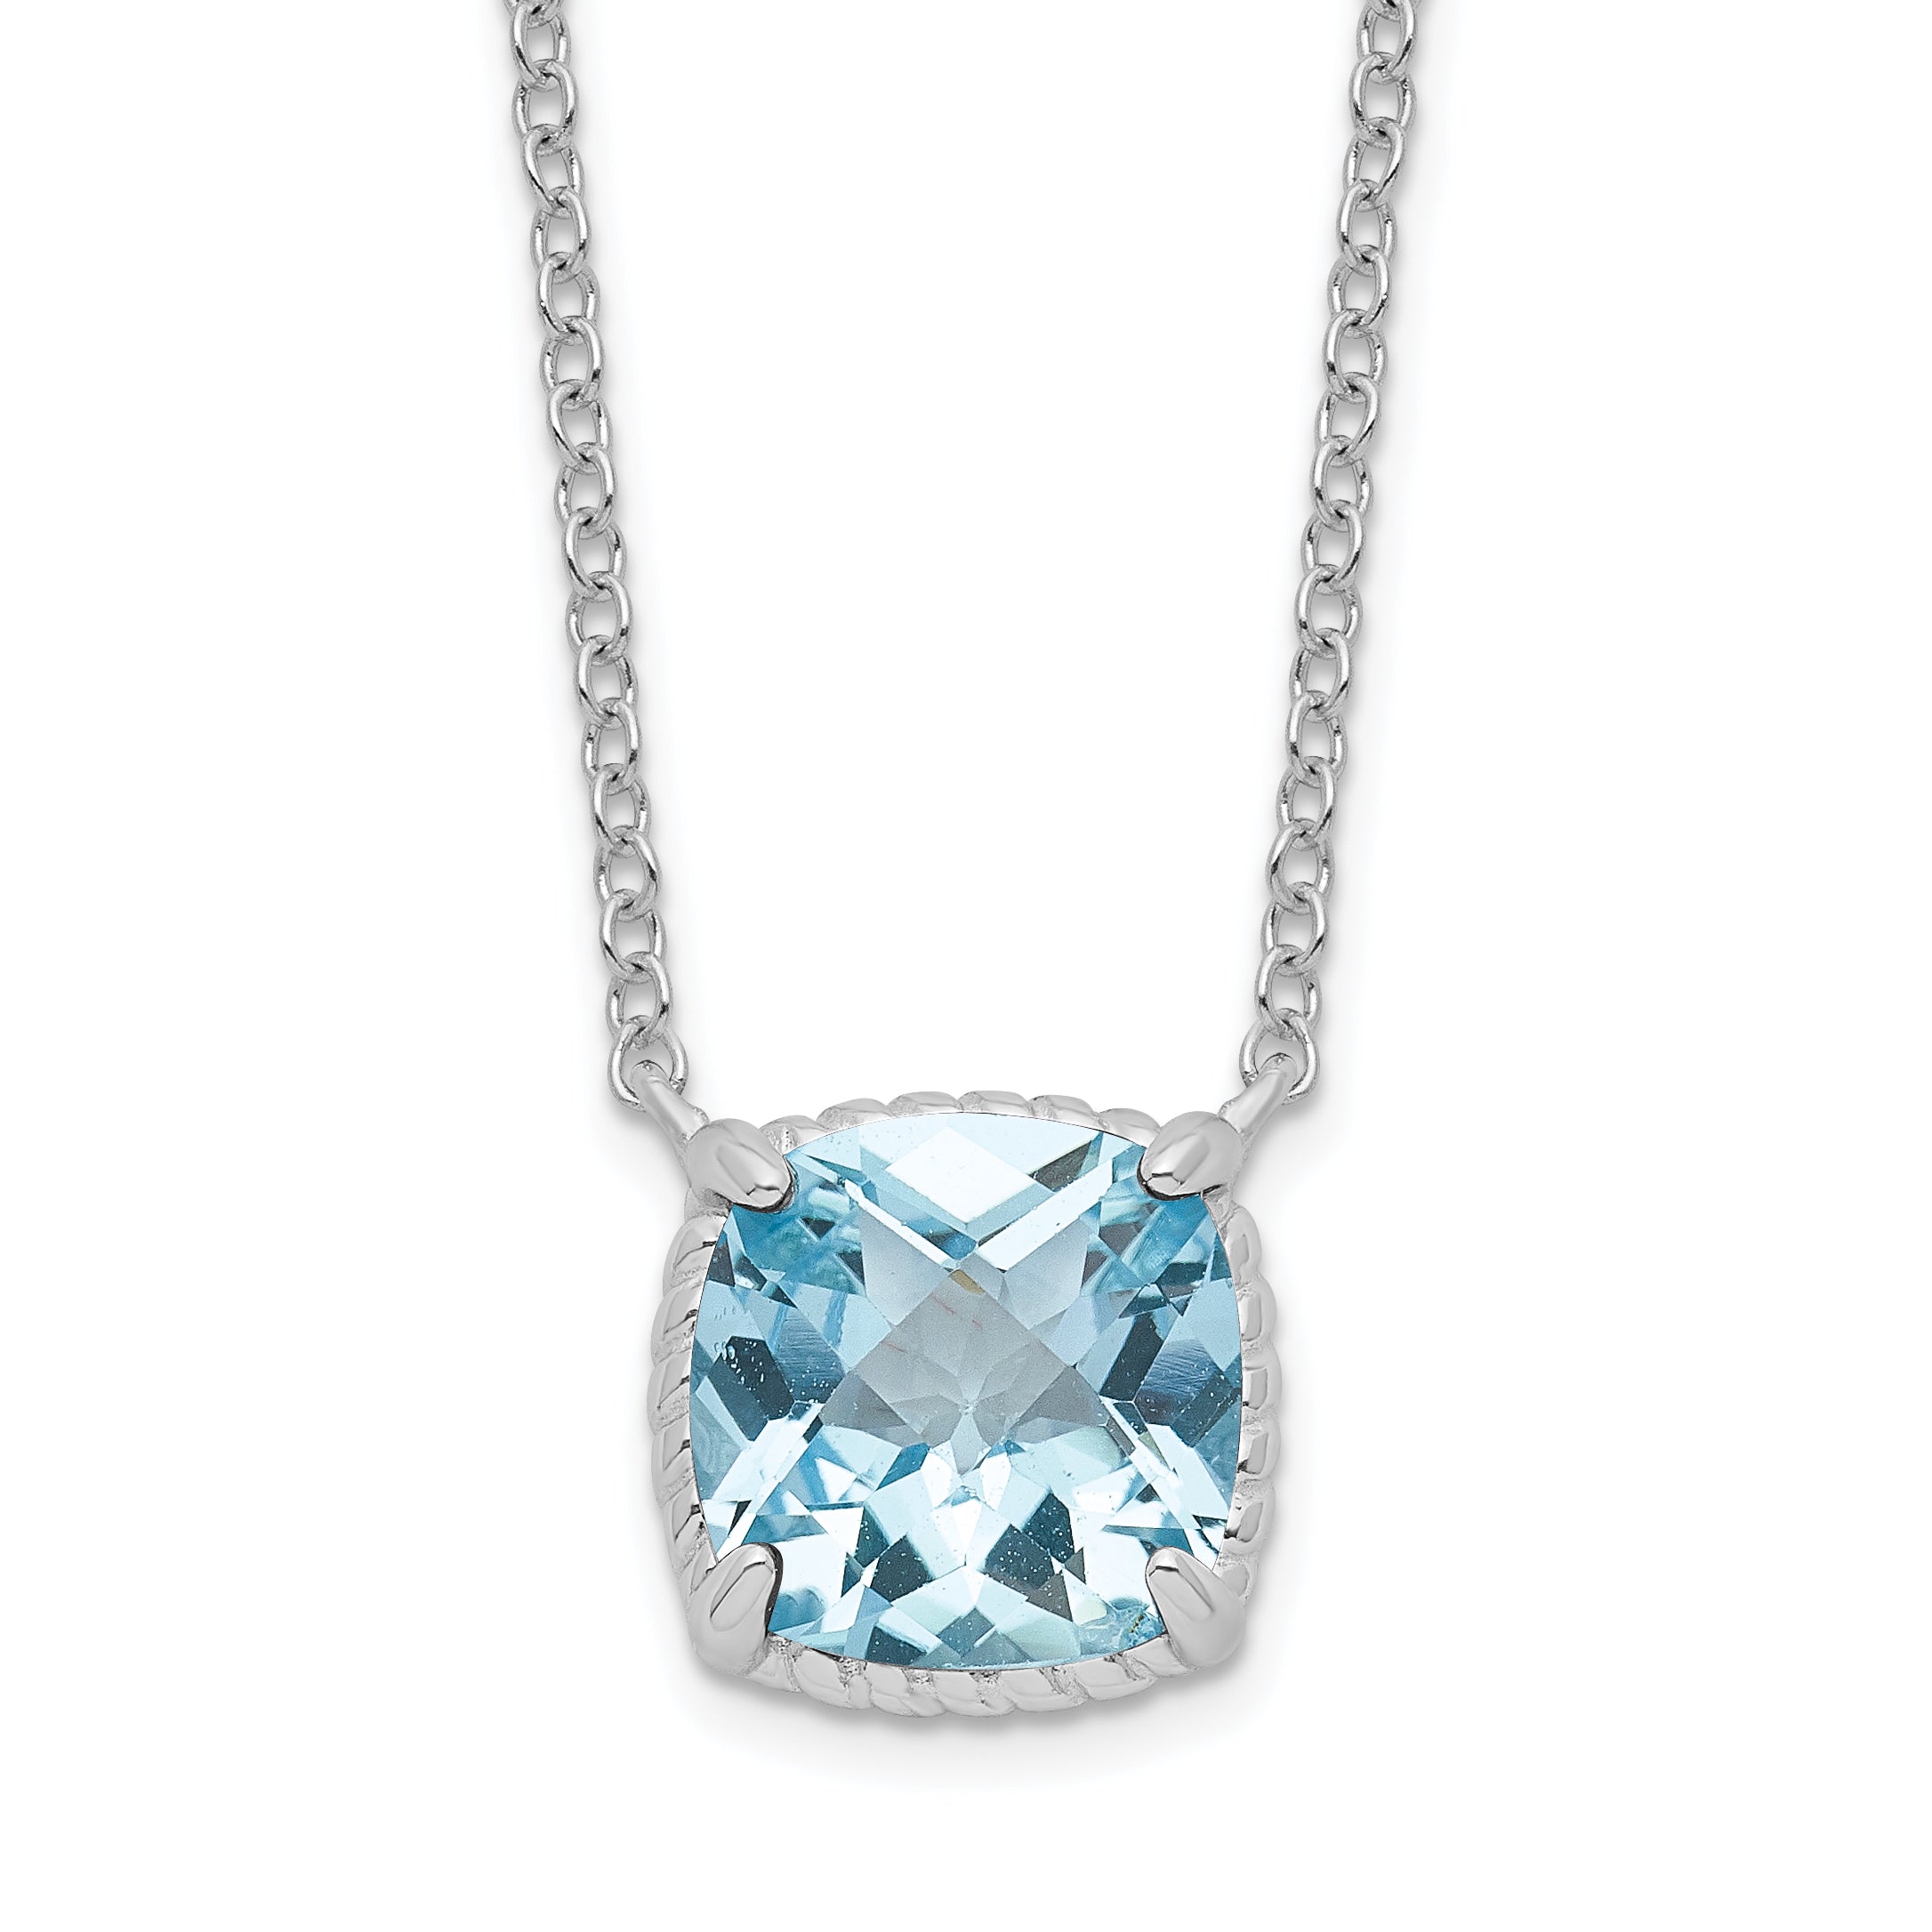 Sterling Silver Rhodium-plated Square Blue Topaz w/2 in ext. Necklace